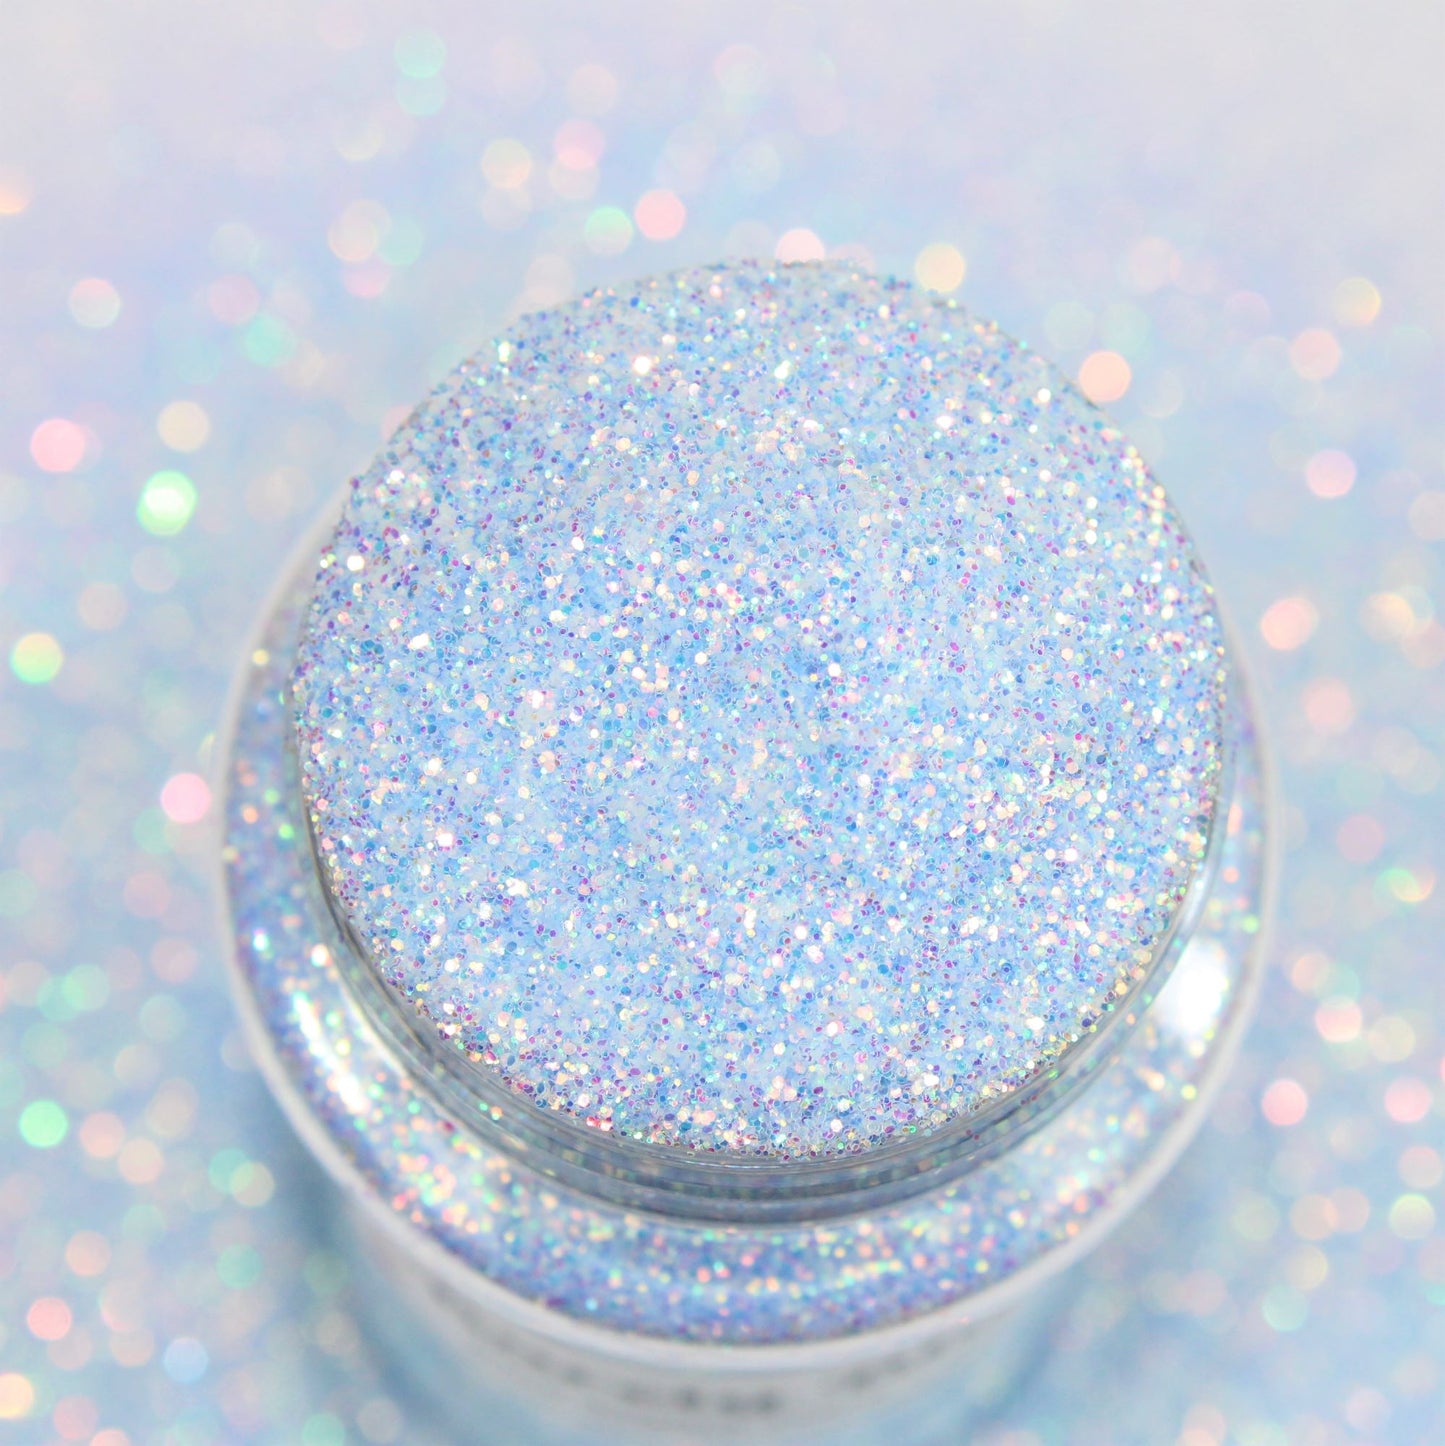 Barely Blue Fine Tinted  Glitter